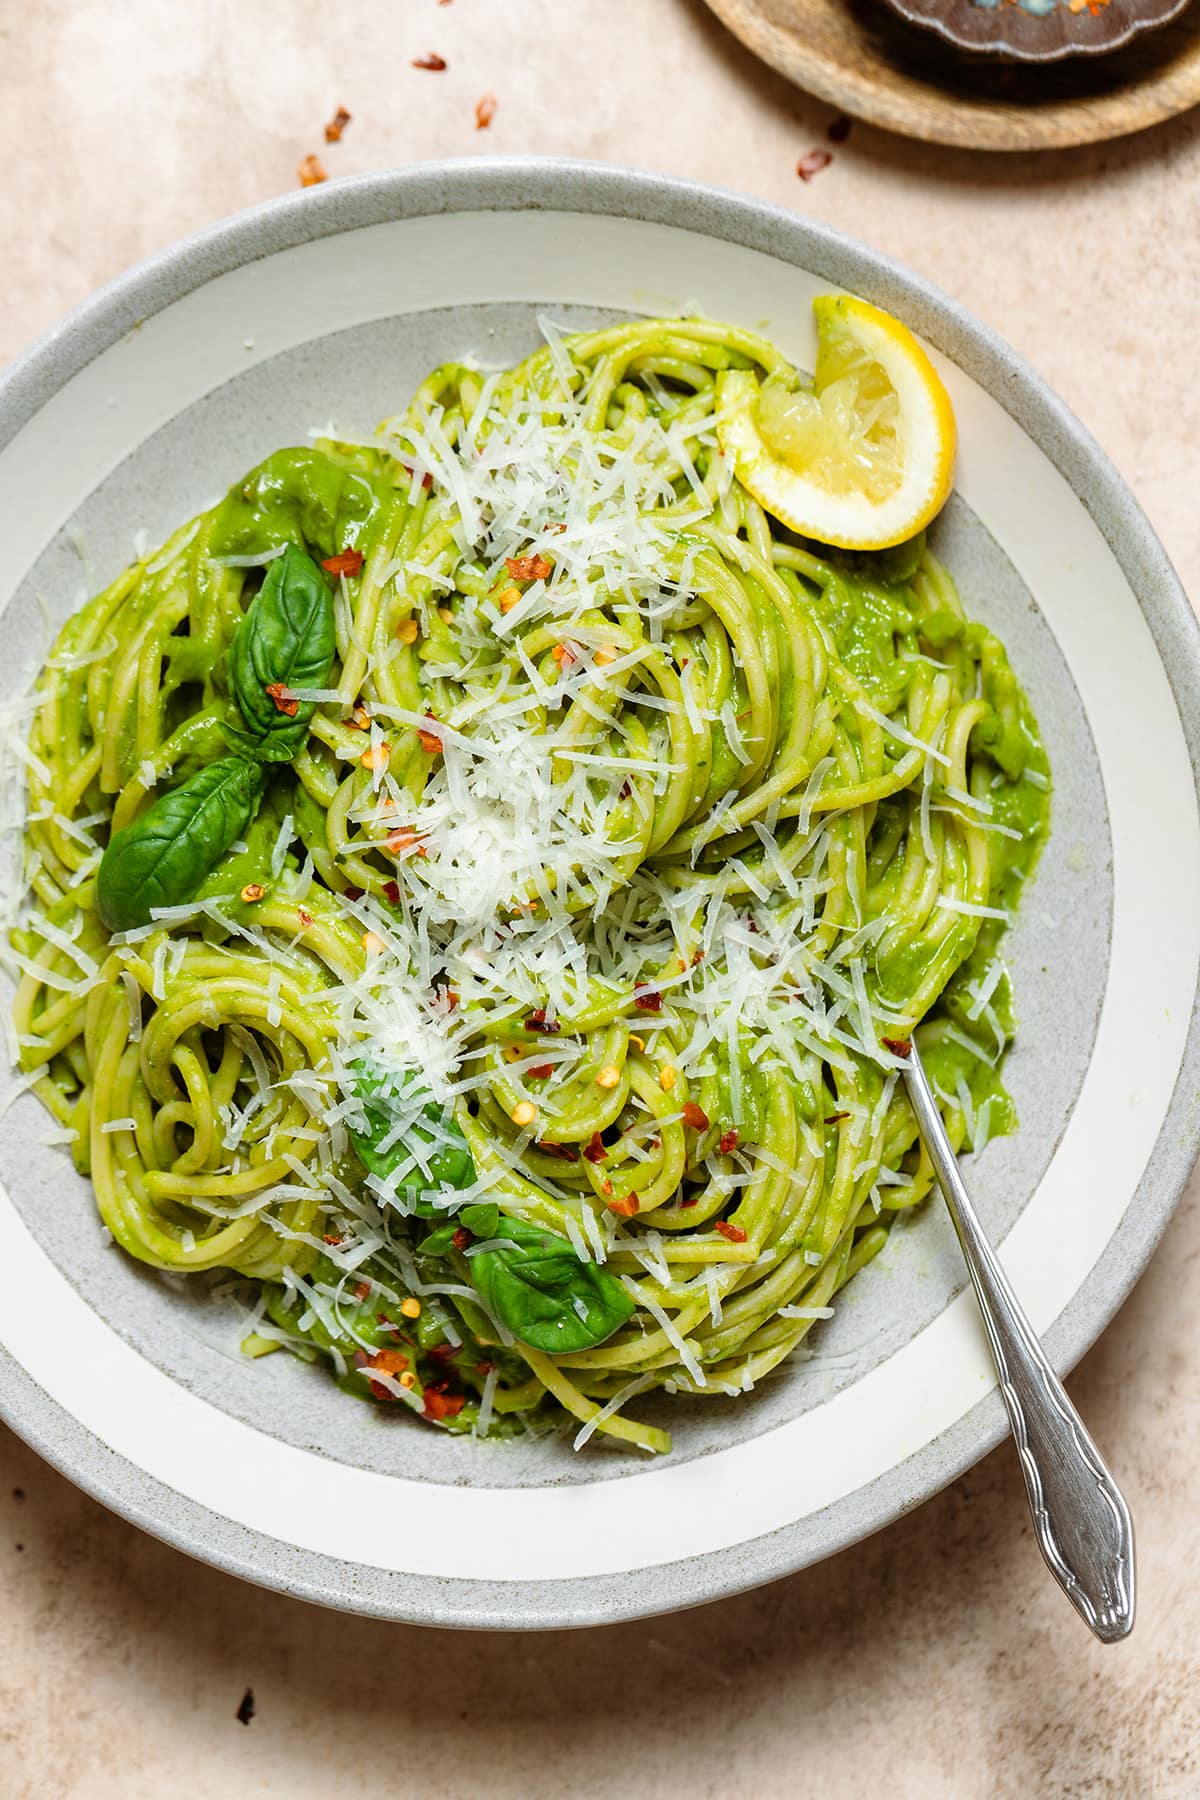 Spaghetti with green sauce in a low grey bowl garnished with fresh shredded parmesan, basil, chili flakes, and lemon.